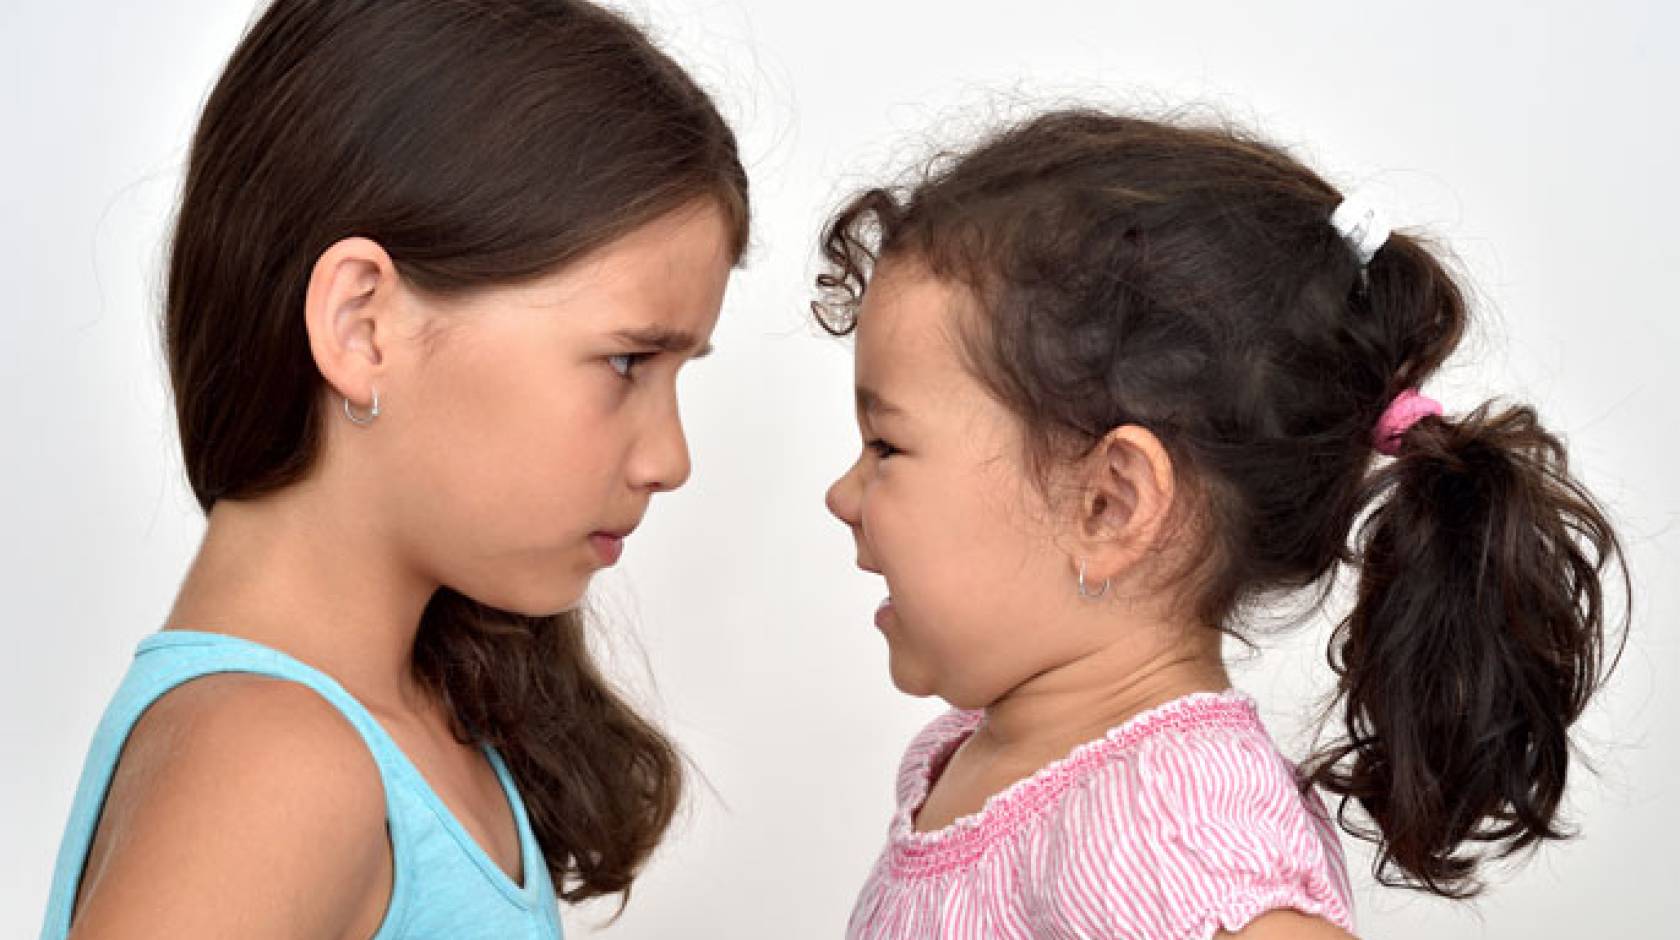 Two little girls look at each other eye to eye, one angry